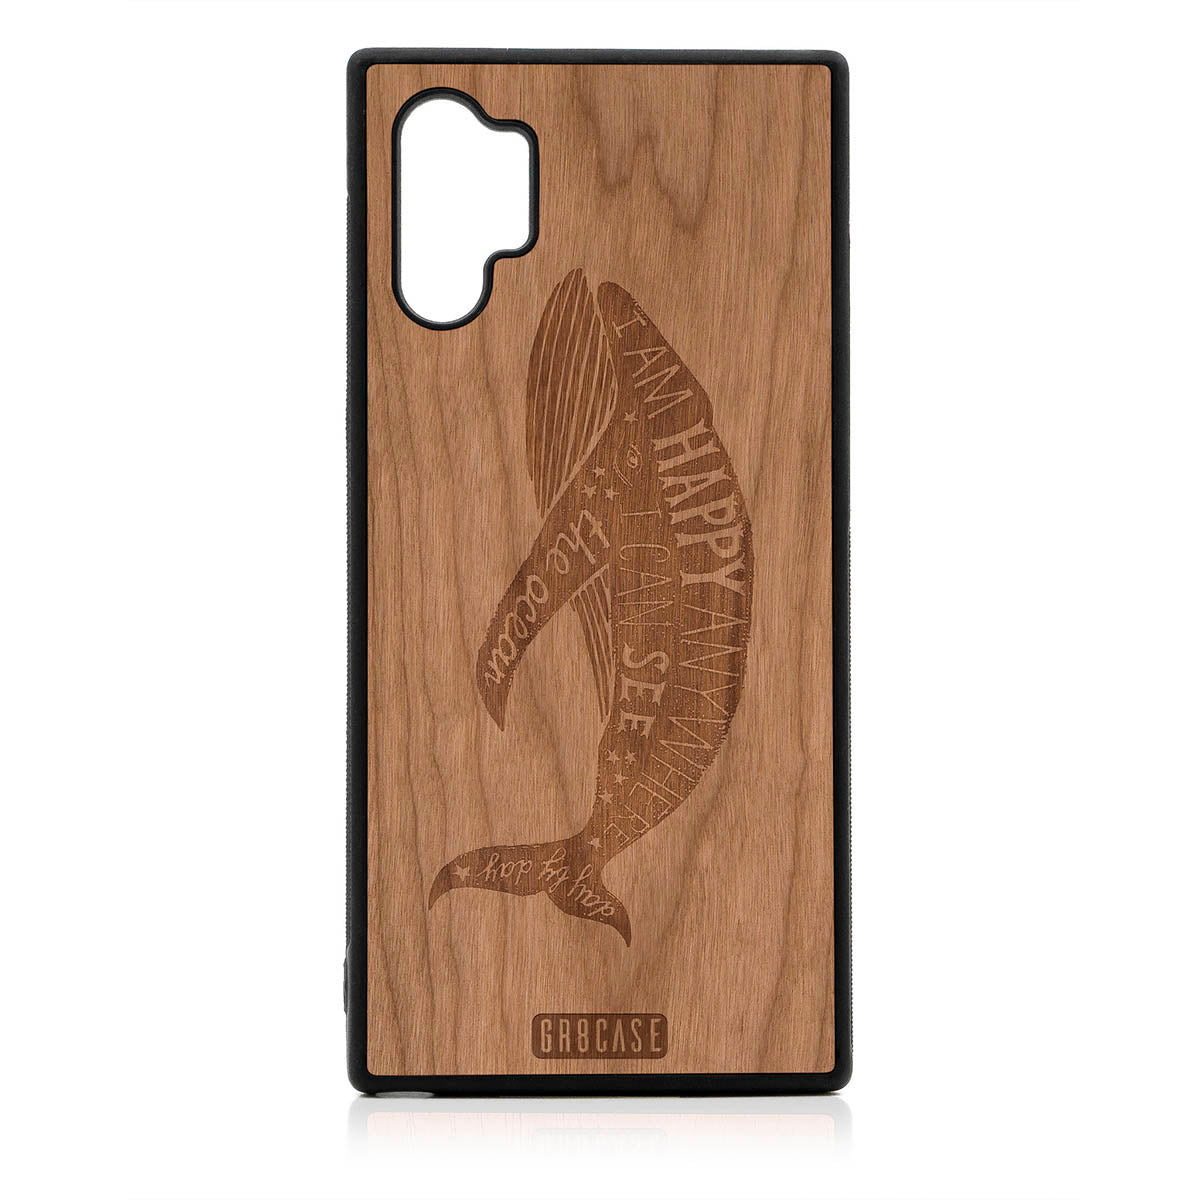 I'm Happy Anywhere I Can See The Ocean (Whale) Design Wood Case For Samsung Galaxy Note 10 Plus